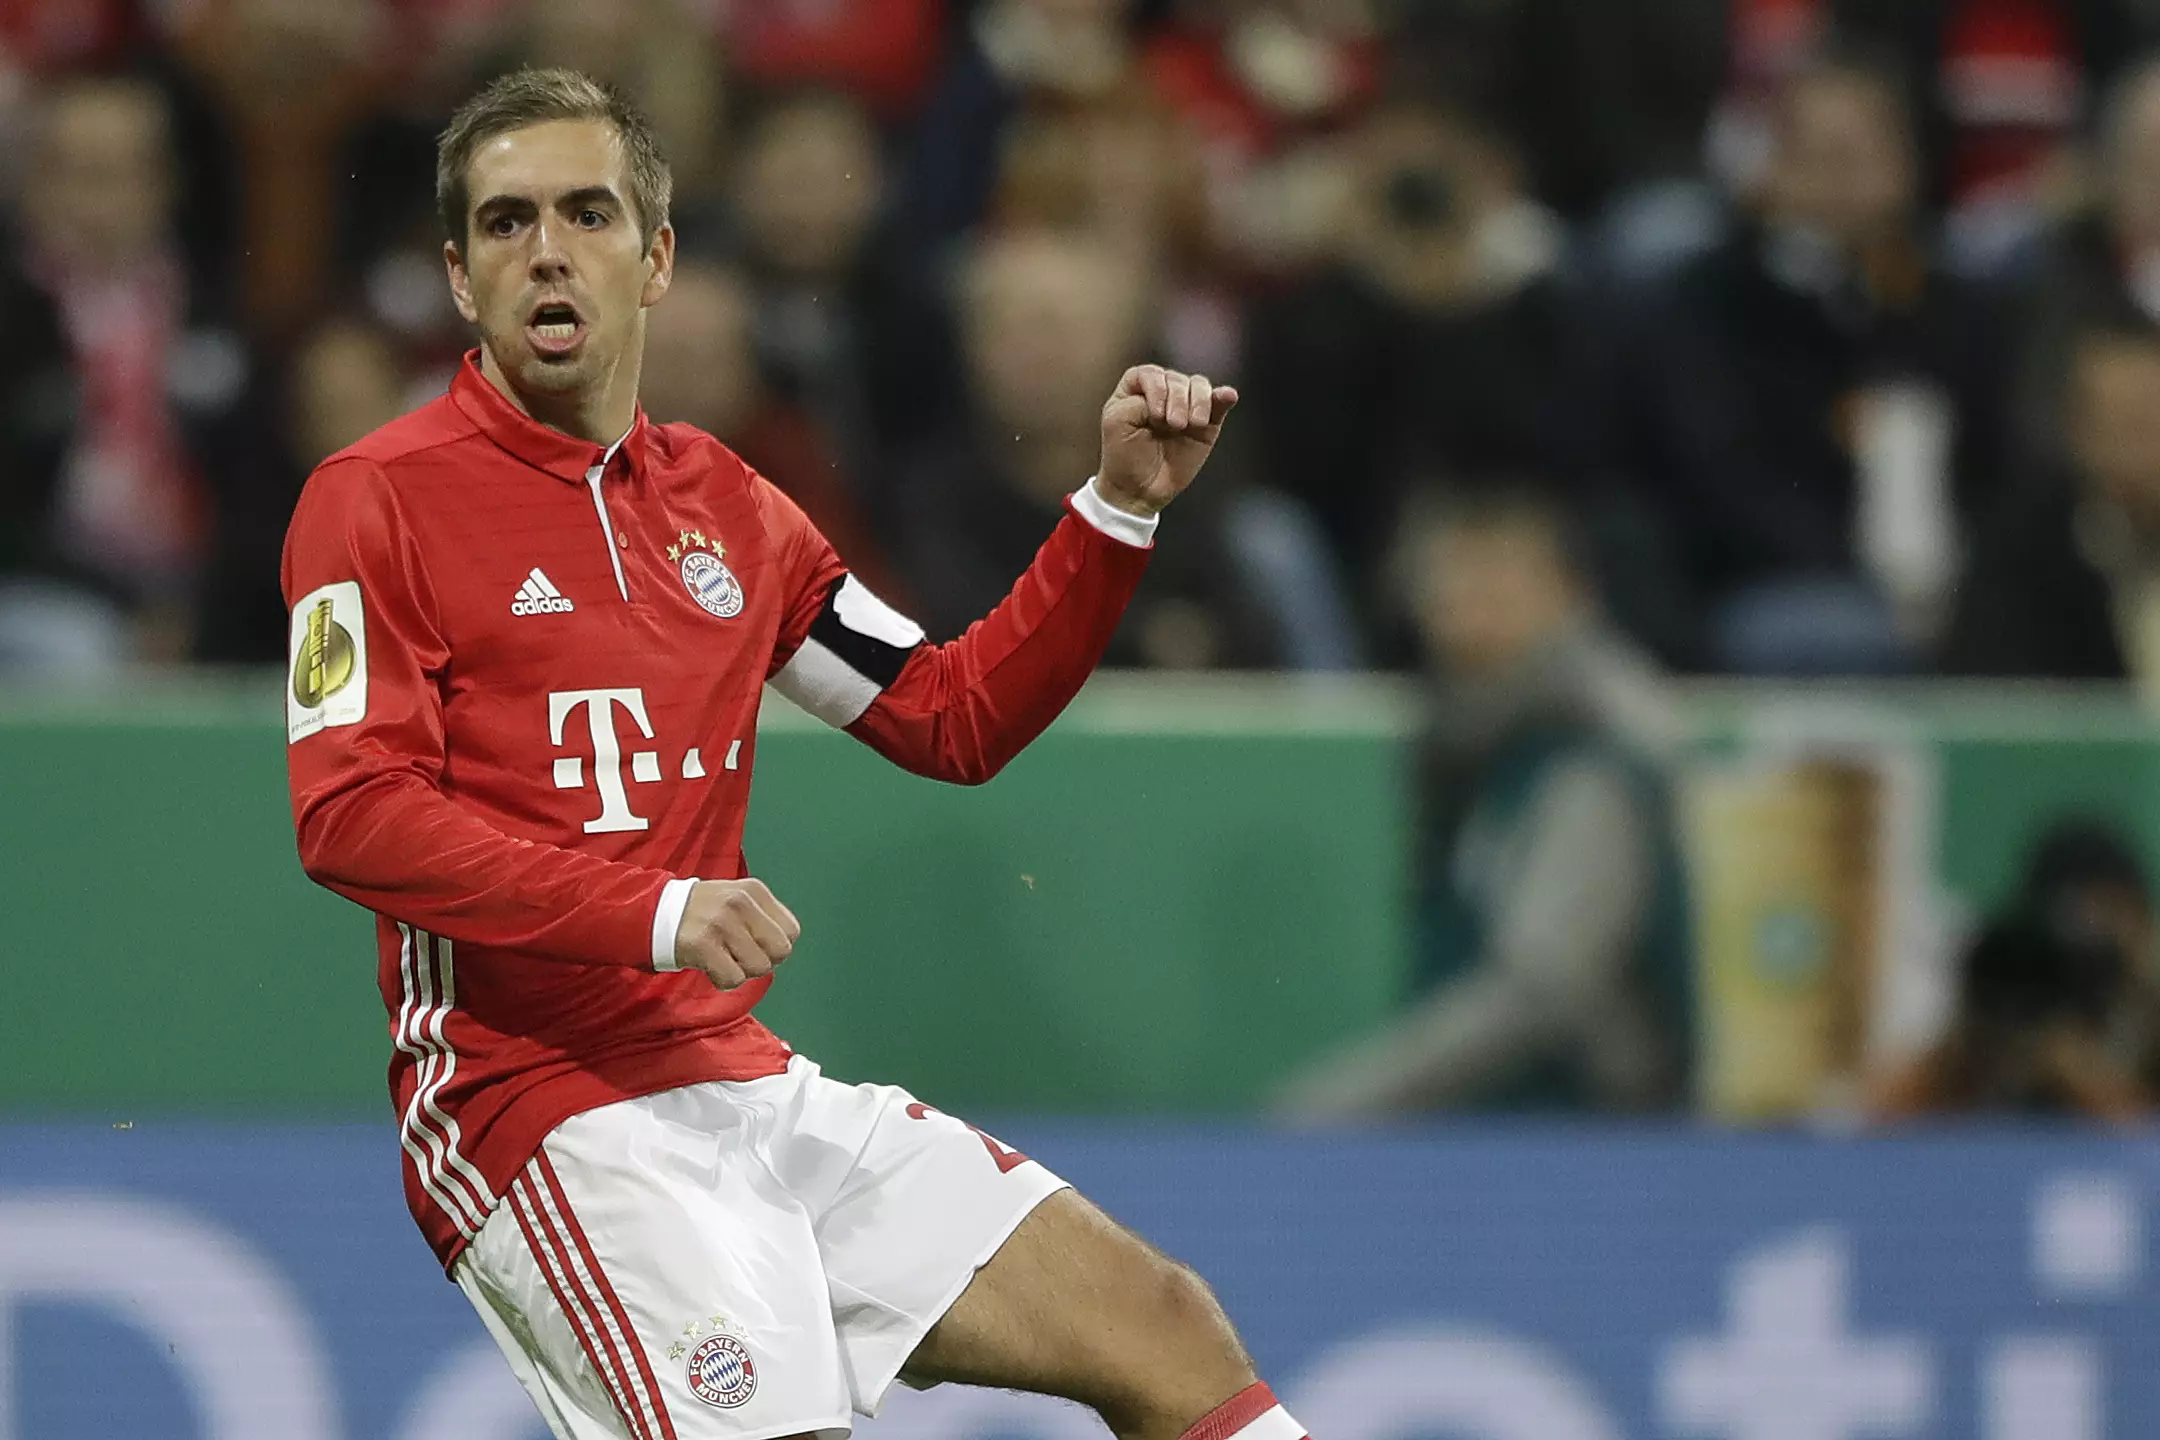 Bayern Reveal Their Unhappiness With Philipp Lahm Retirement Announcement